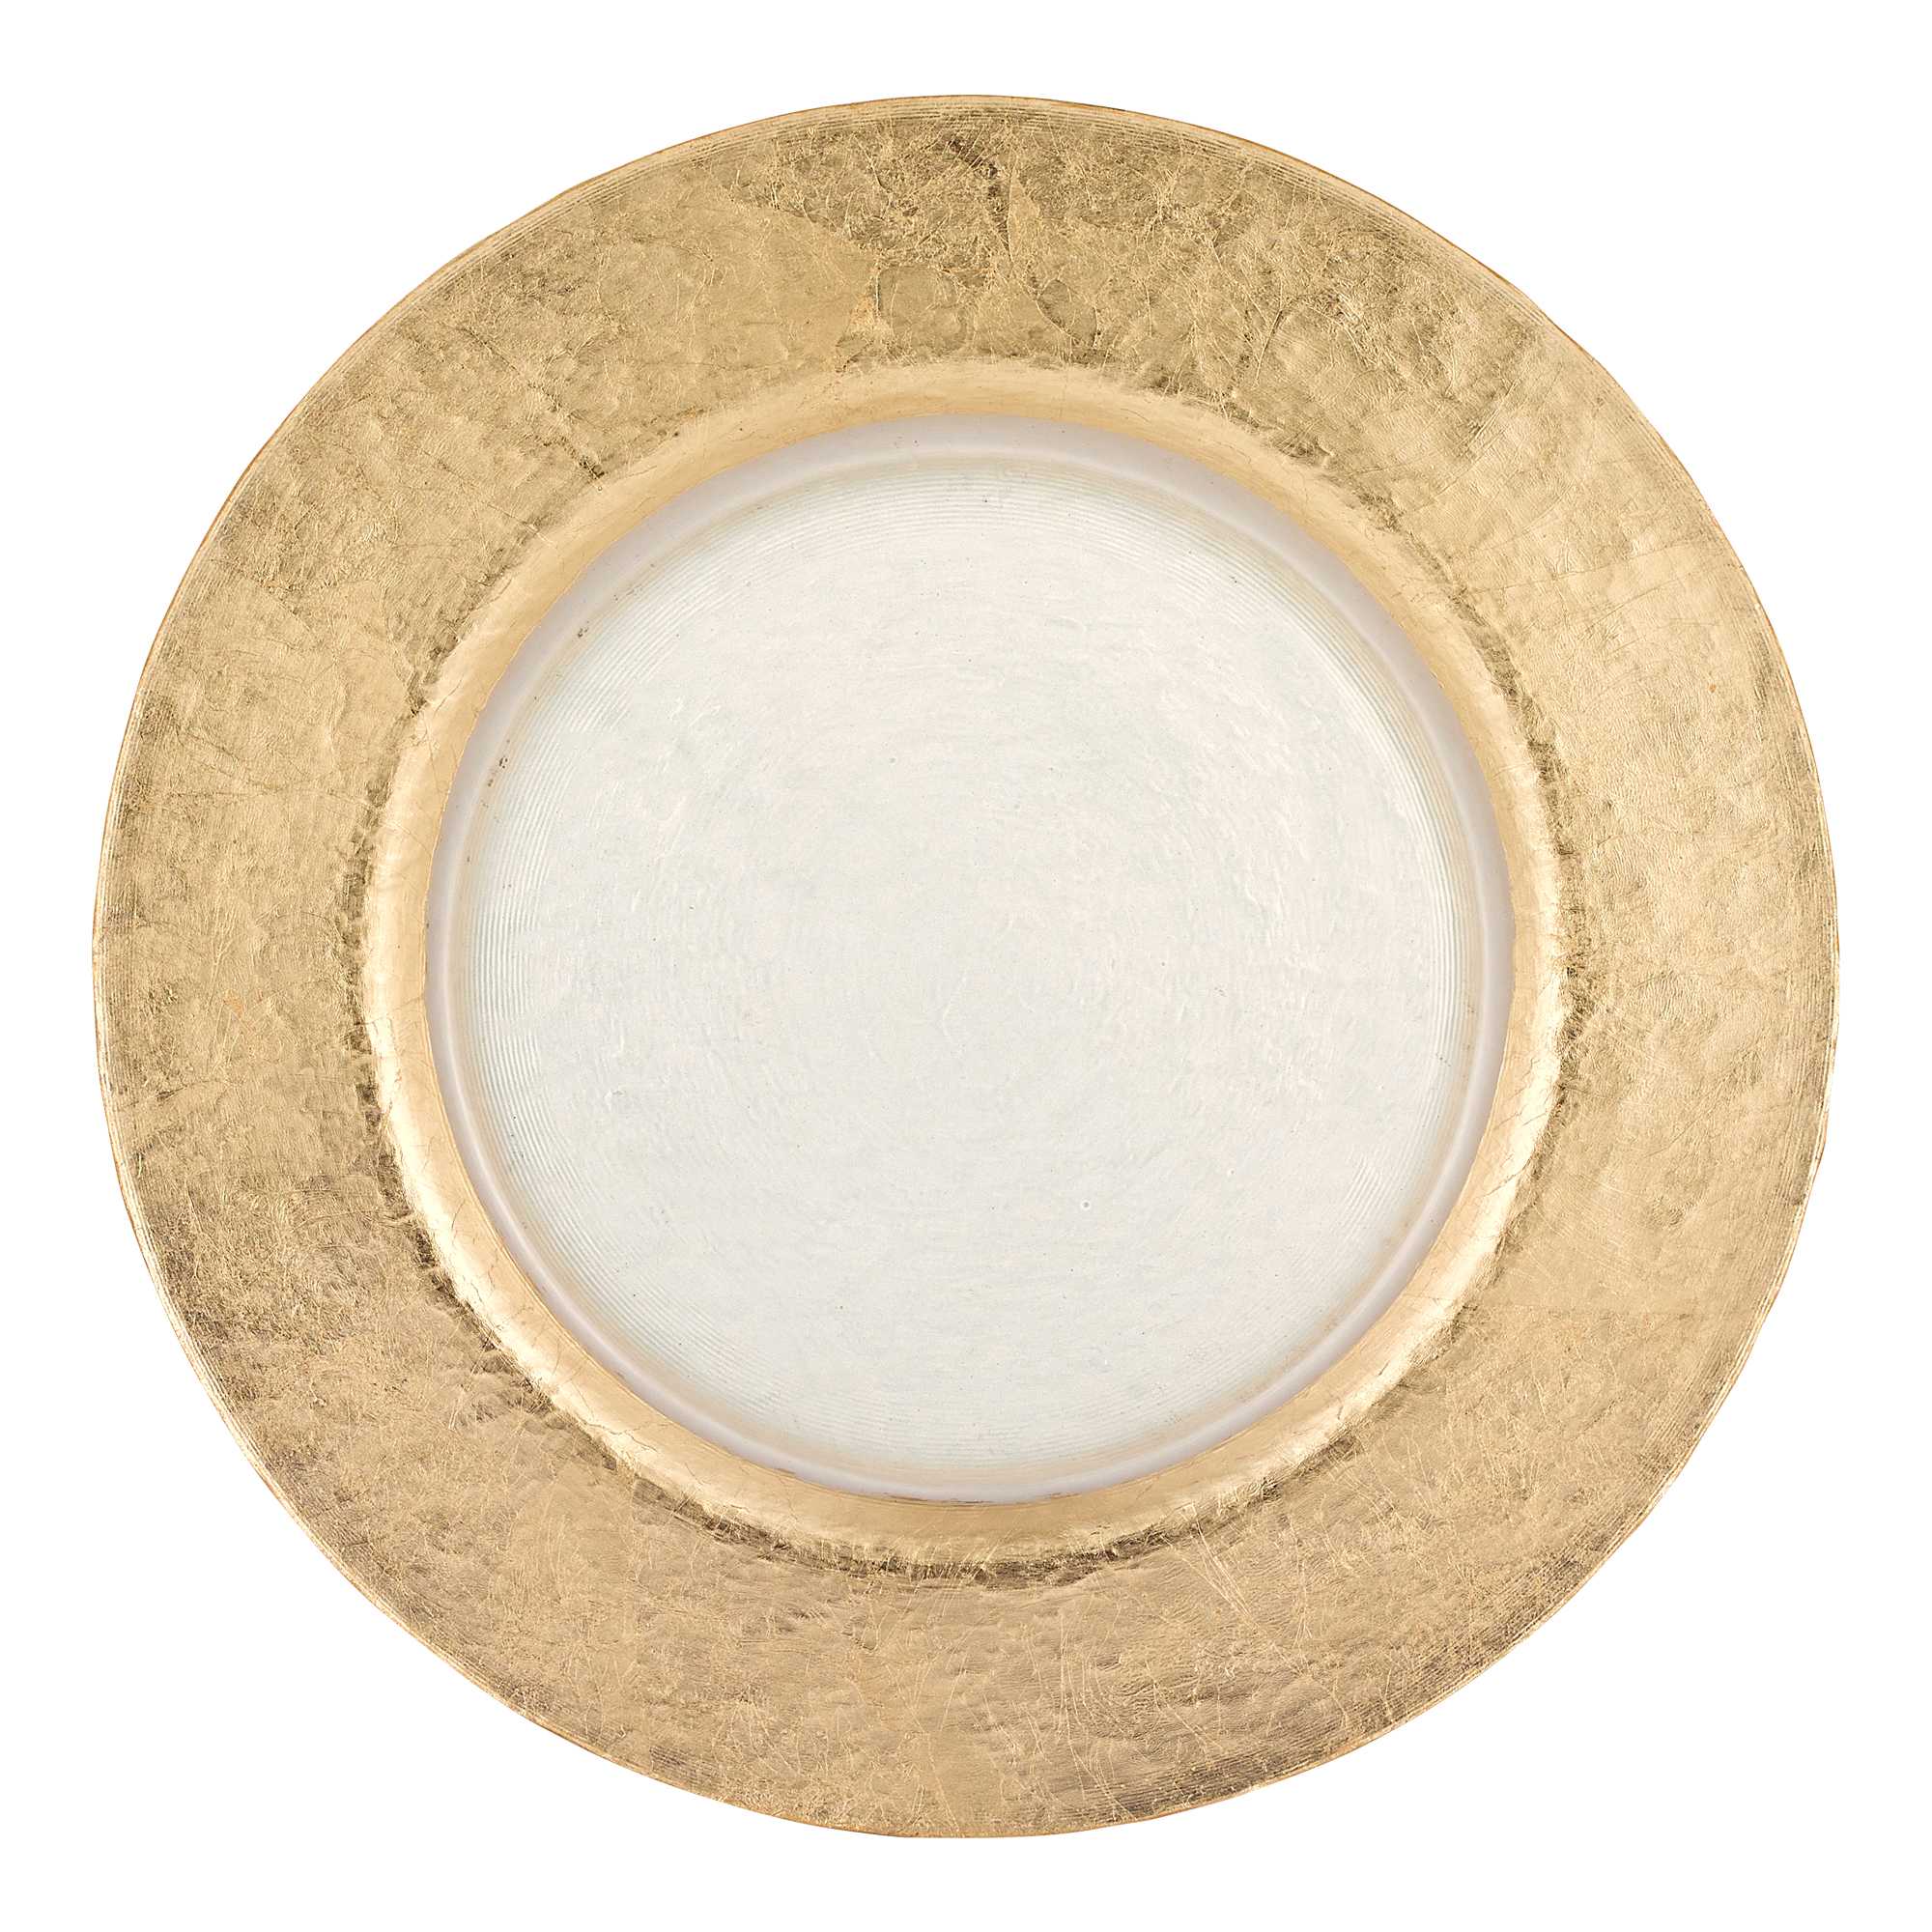 13-Hand-Crafted-Gold-Glass-Authentic-Leaf-Round-Charger-Plate-Dinnerware